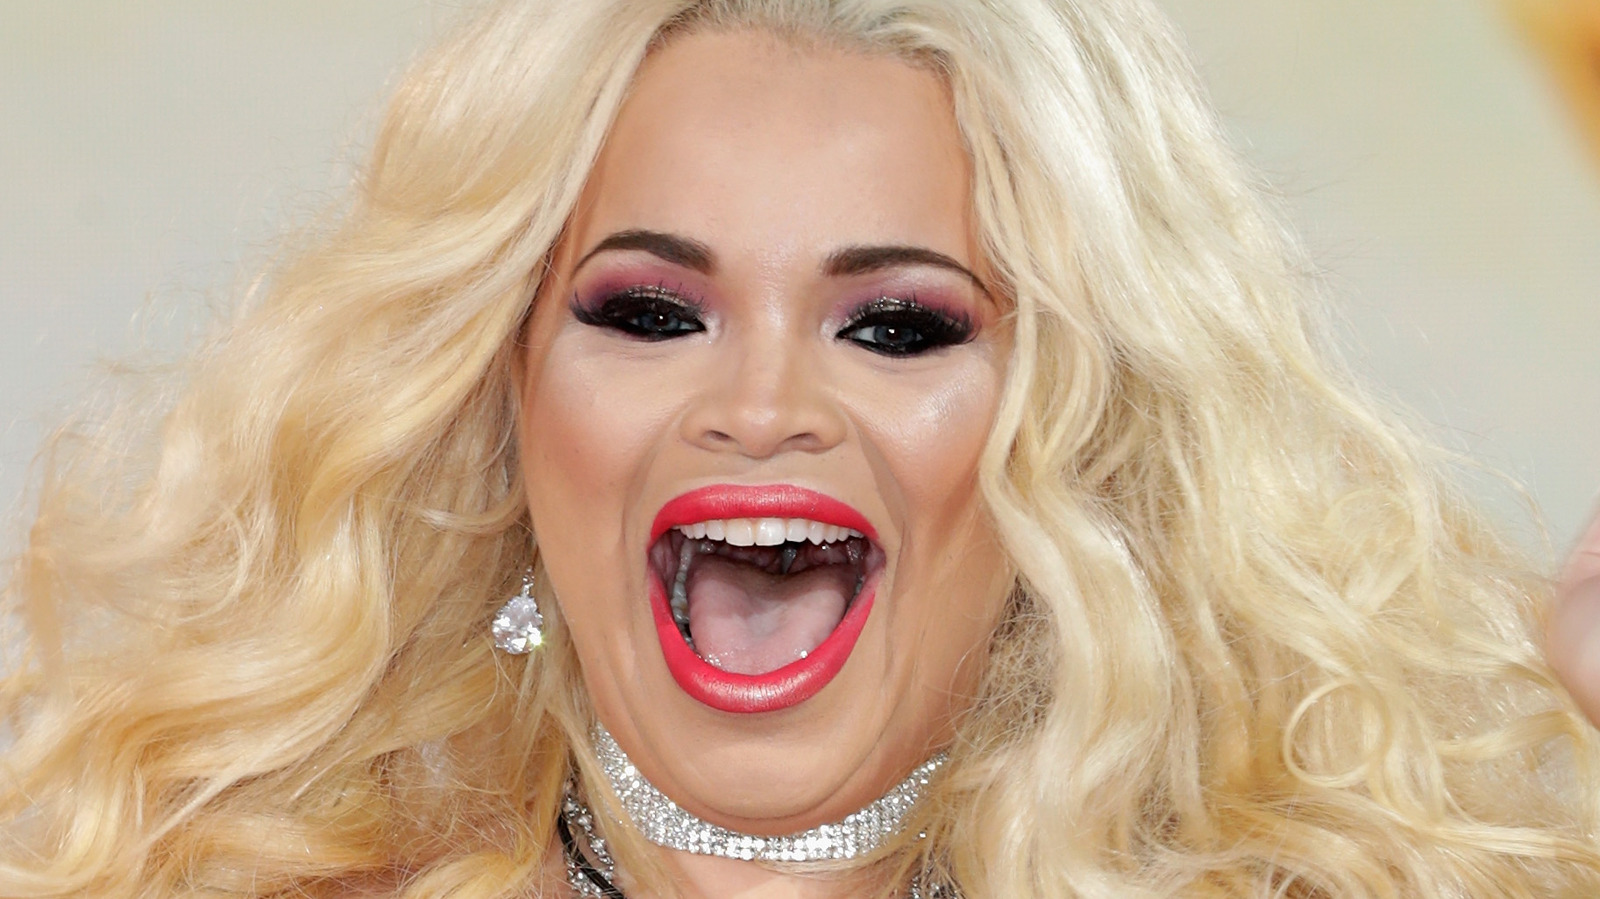 You've watched her mukbangs, but just what does Trisha Paytas eat in a...